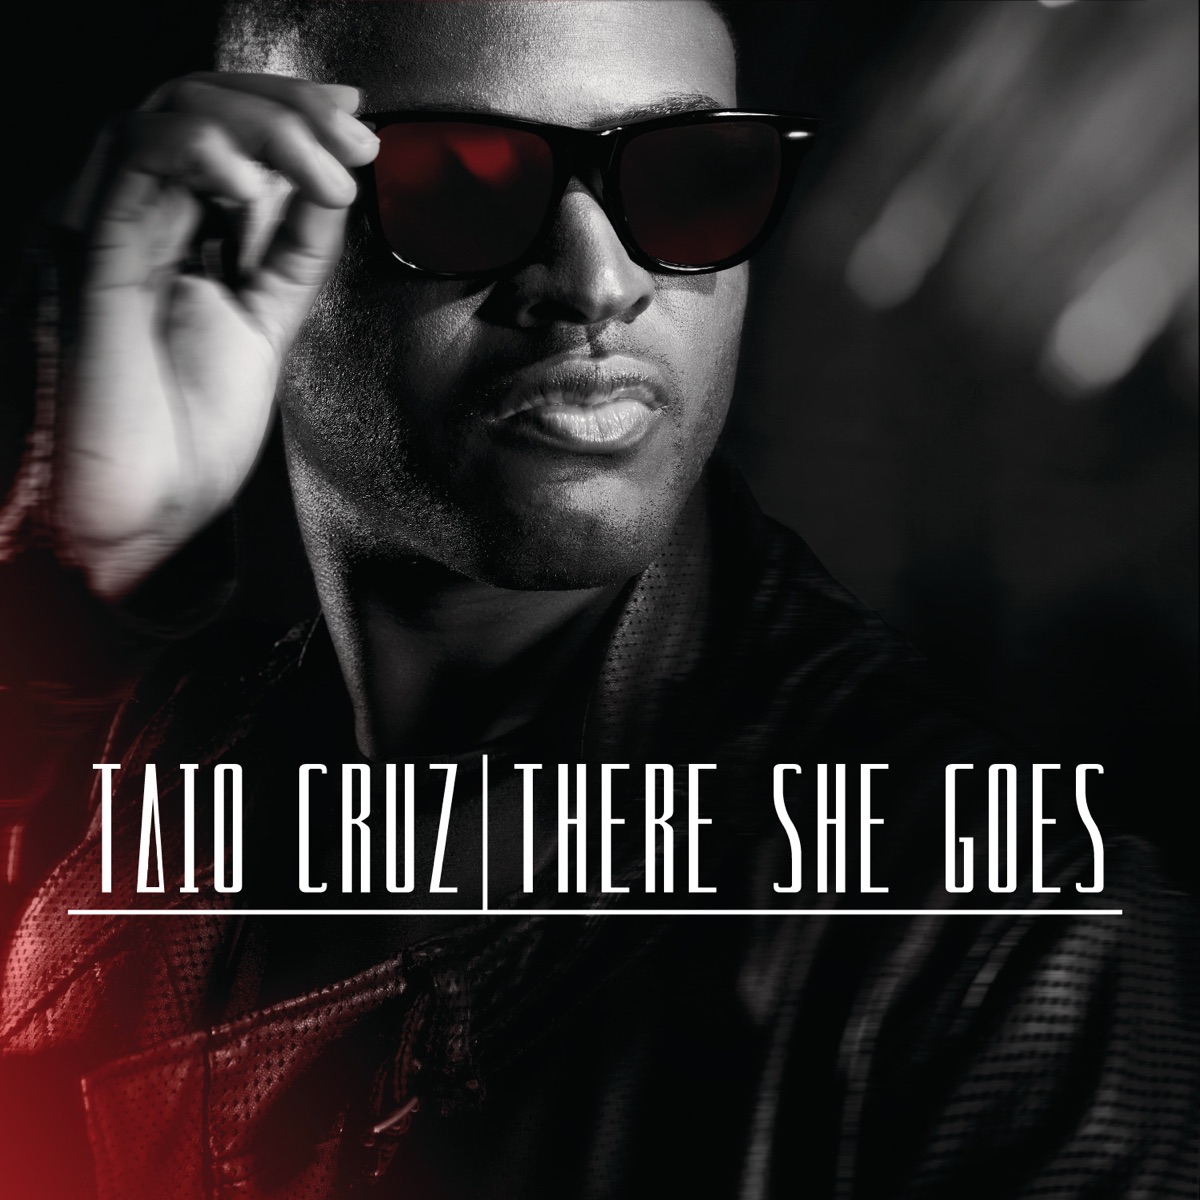 Taio Cruz ft. featuring Pitbull There She Goes cover artwork